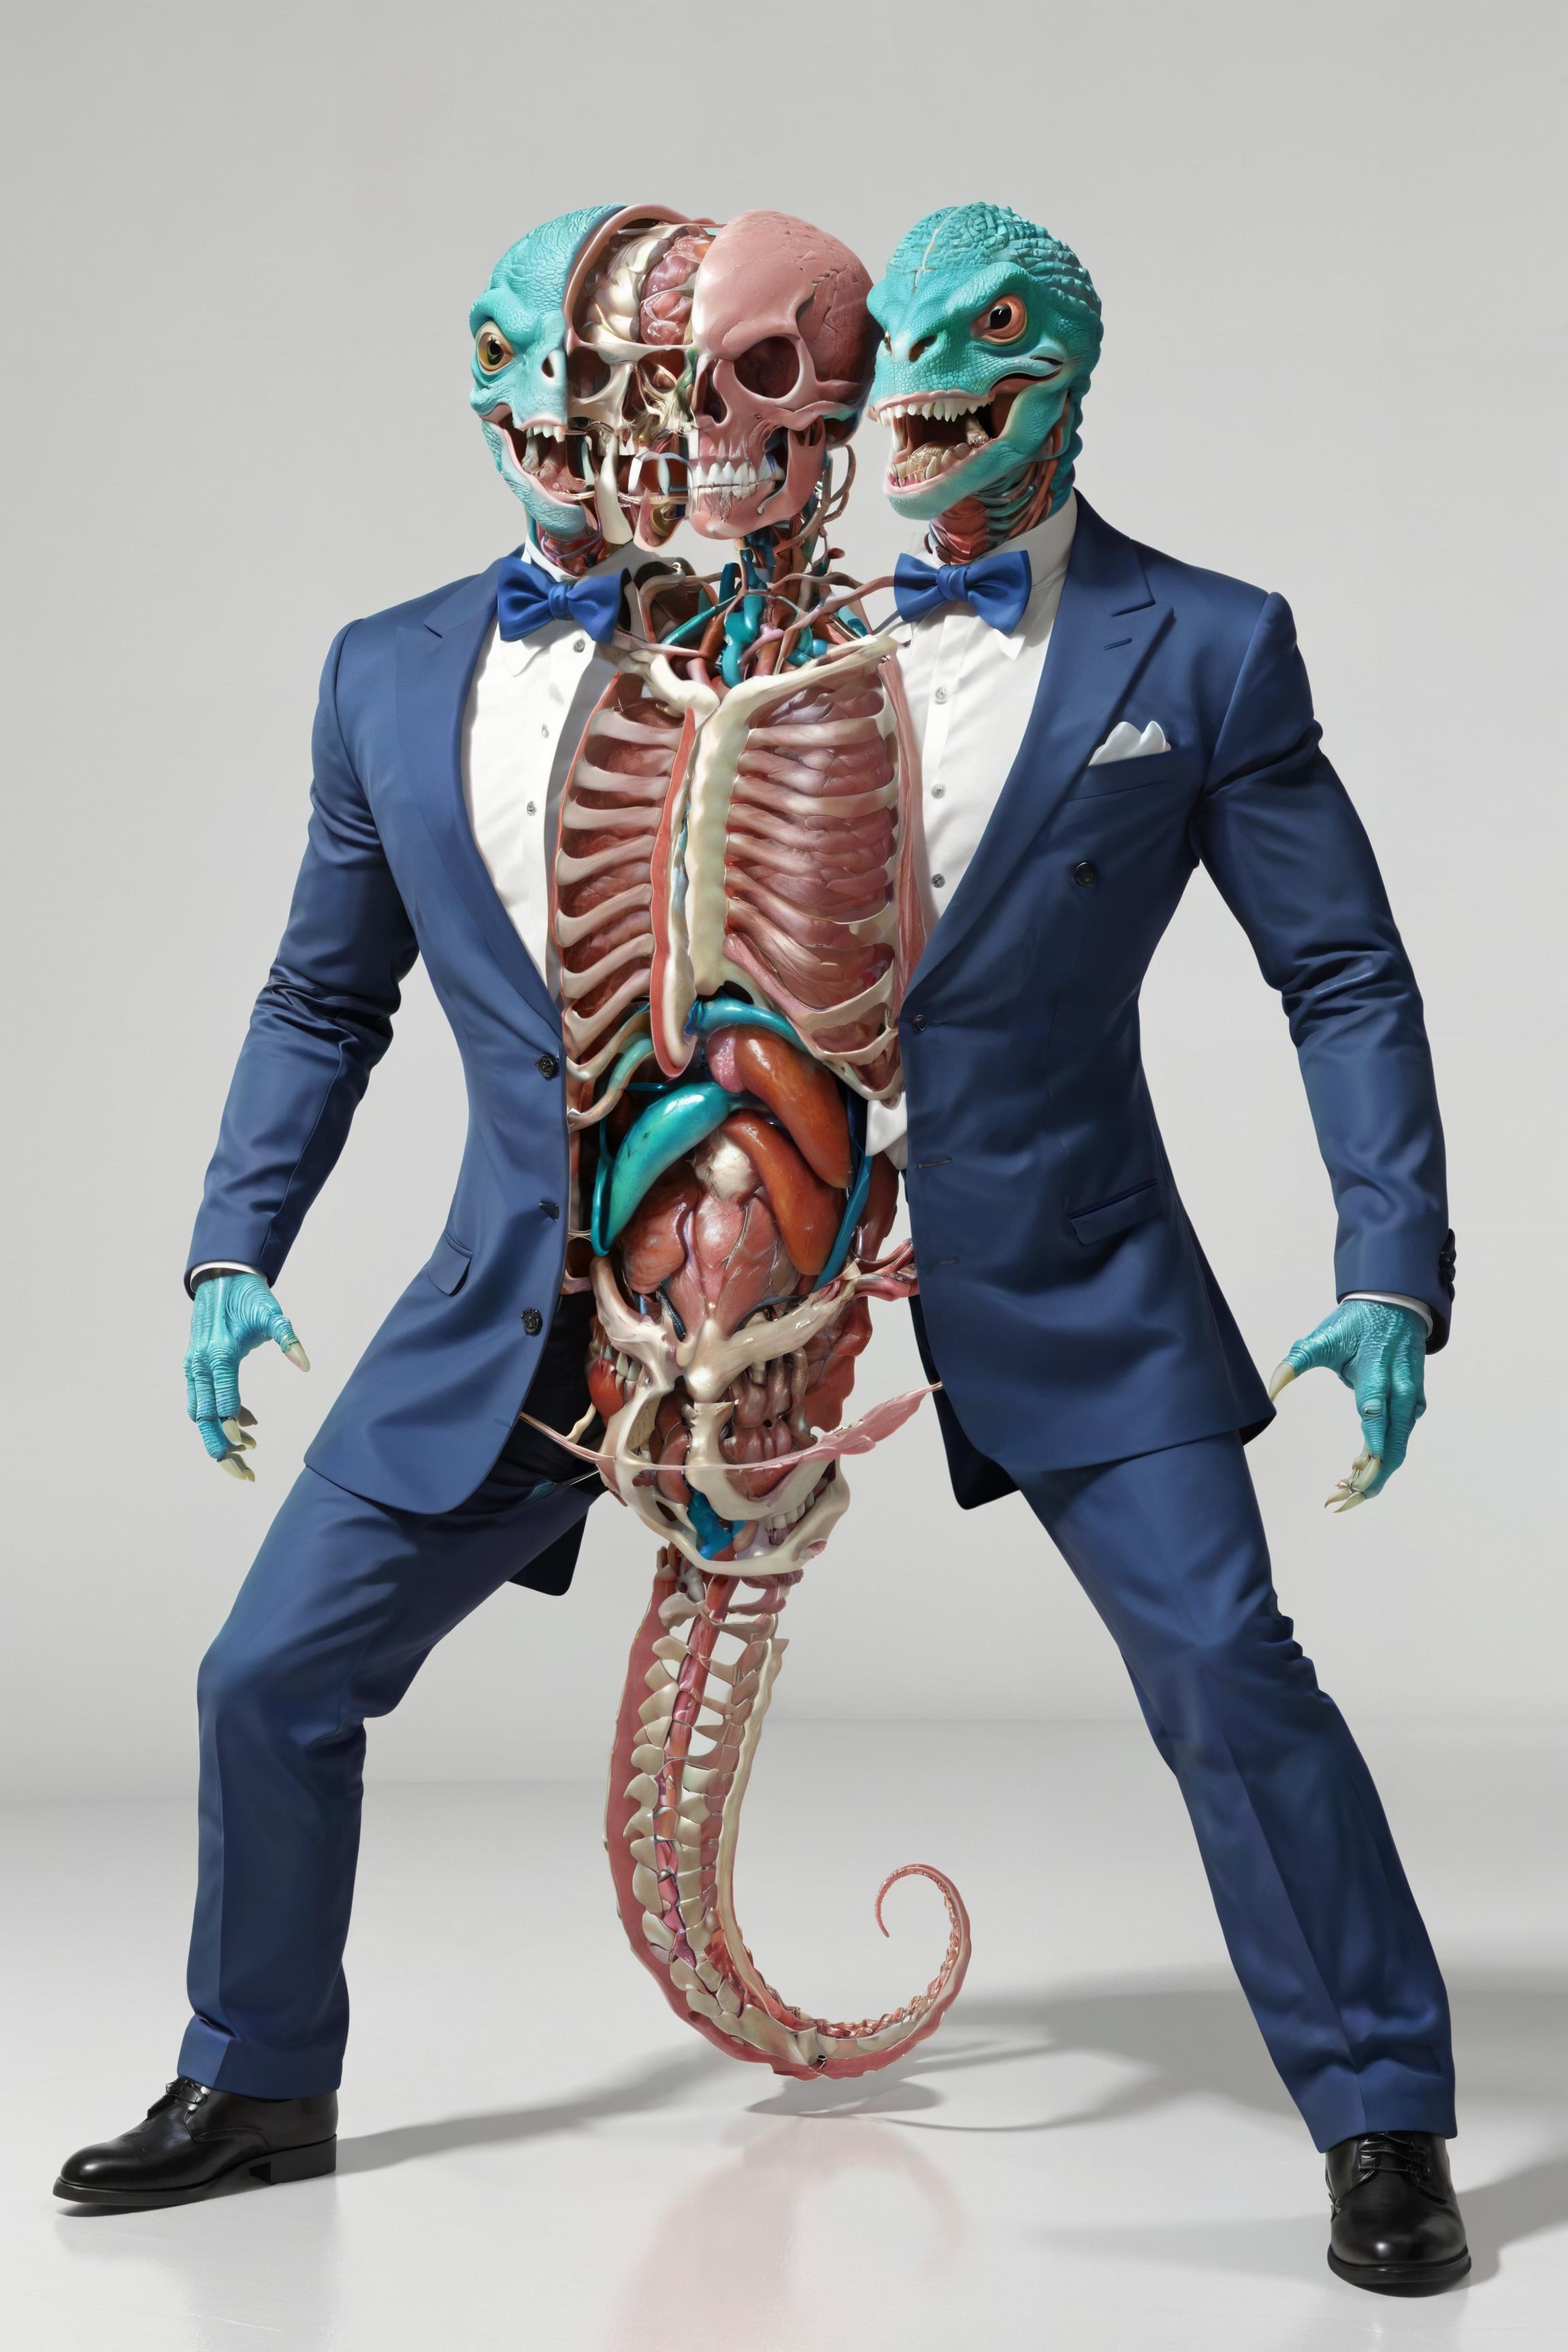 A humorous statue of a man wearing a suit and a tie with a skeleton inside his chest.